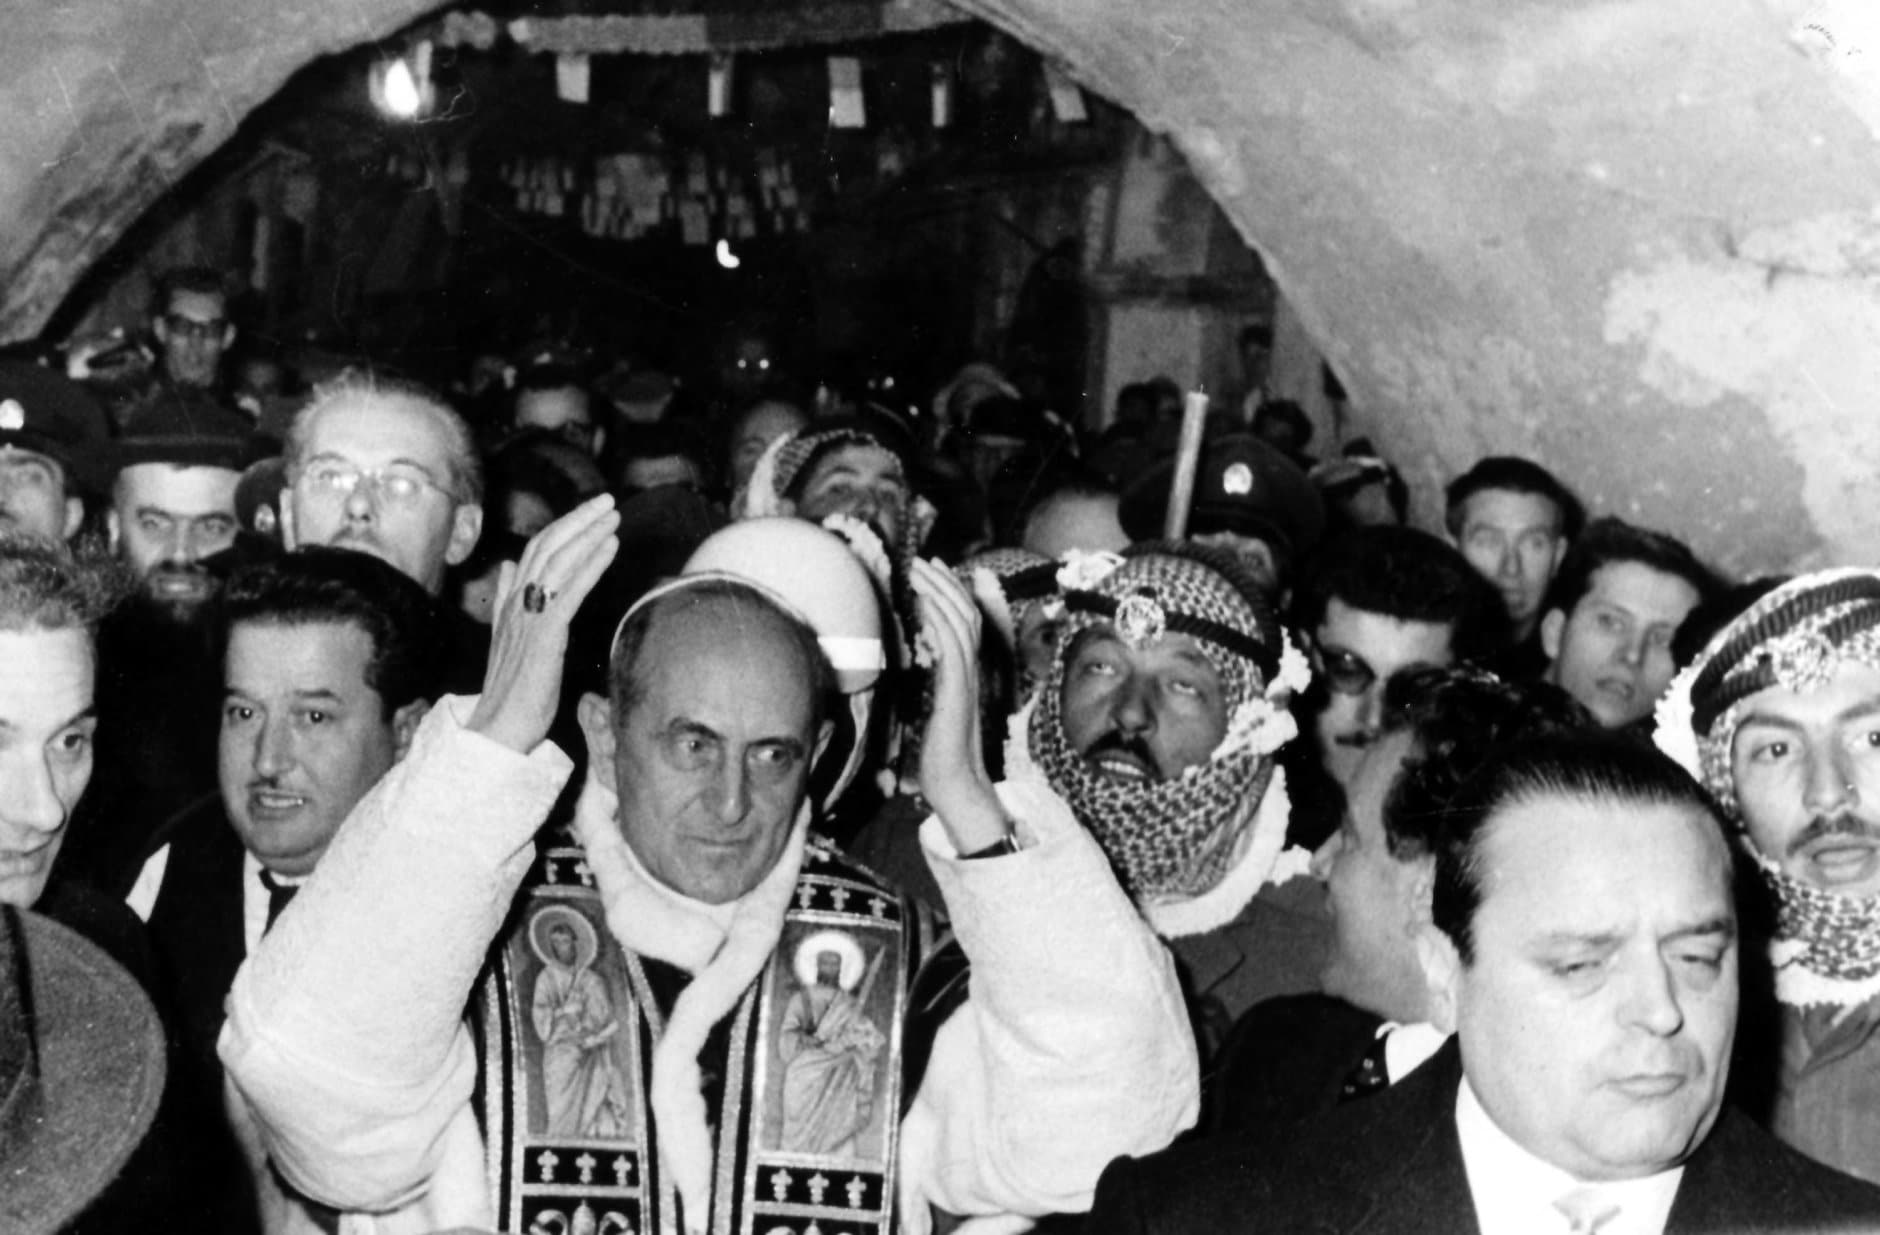 Pope Paul VI answers to cheering crowd in the old city of Jerusalem along the Via Crucis, Jan. 4, 1964. (Ap Photo)